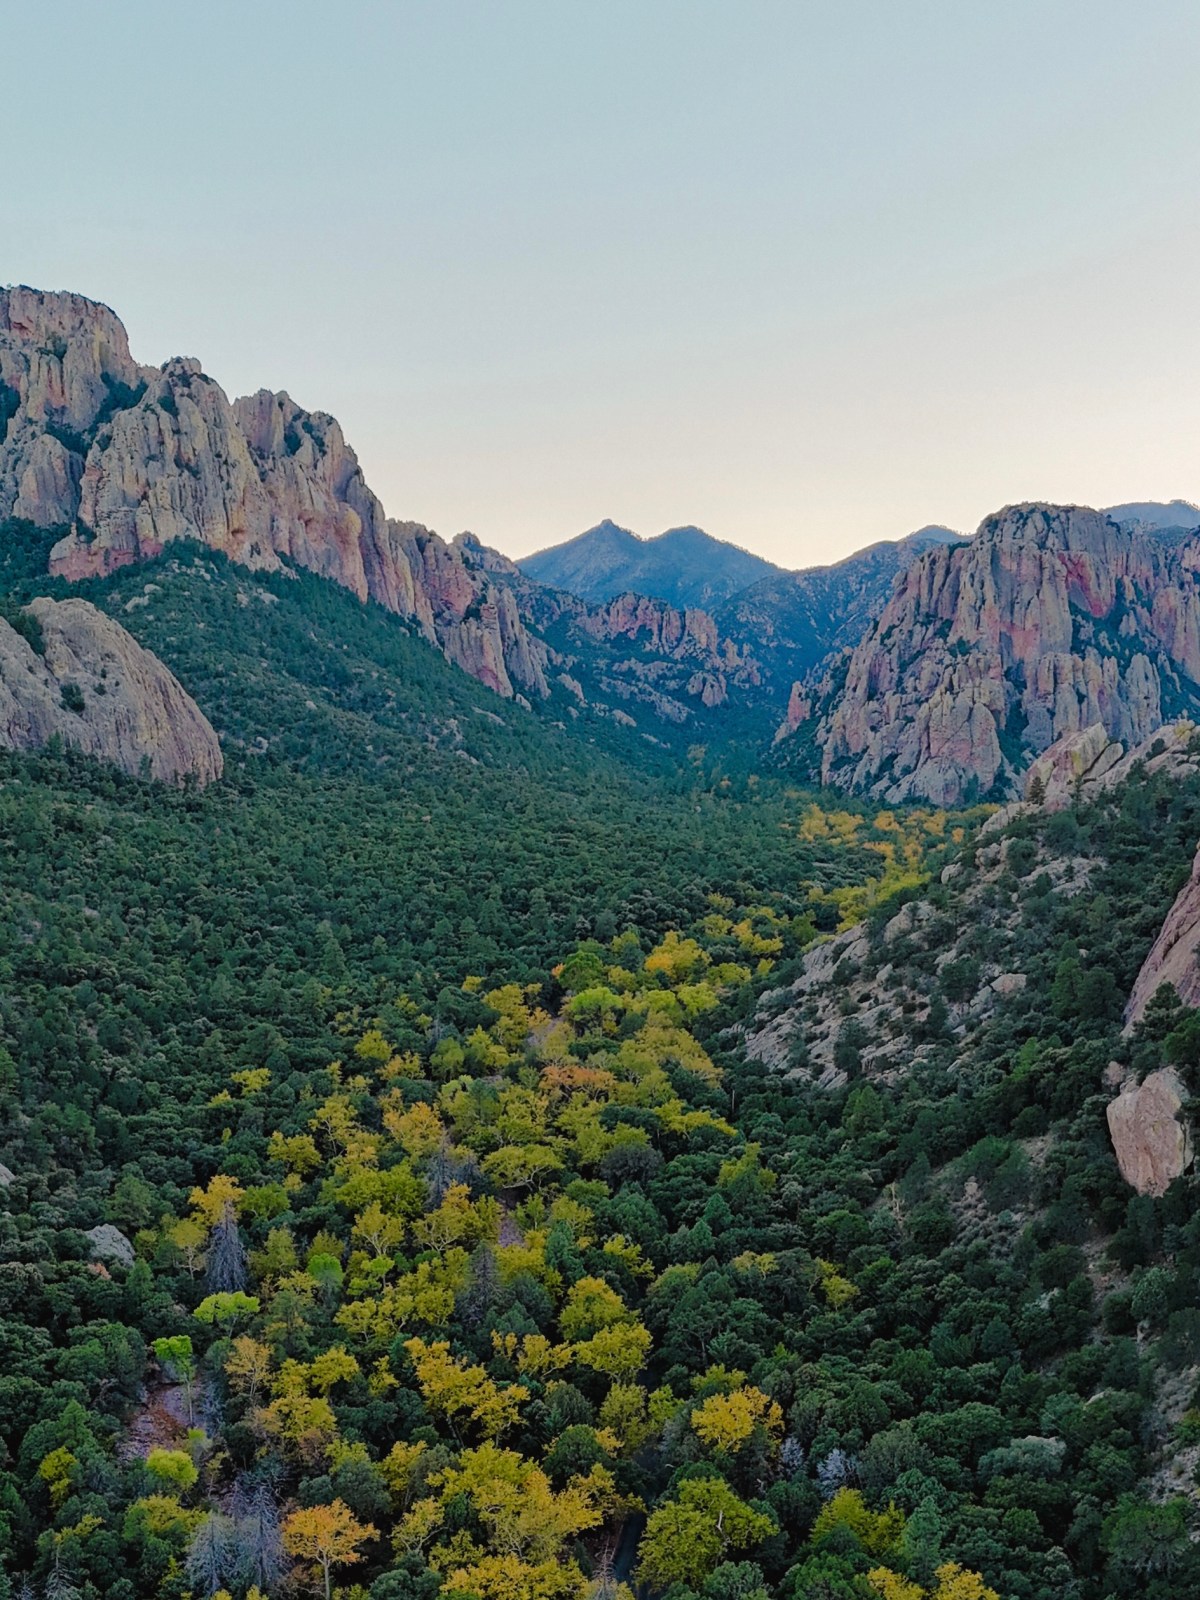 Cave Creek Canyon in the Chiricahua Mountains of Coronado National Forest in Portal, Arizona